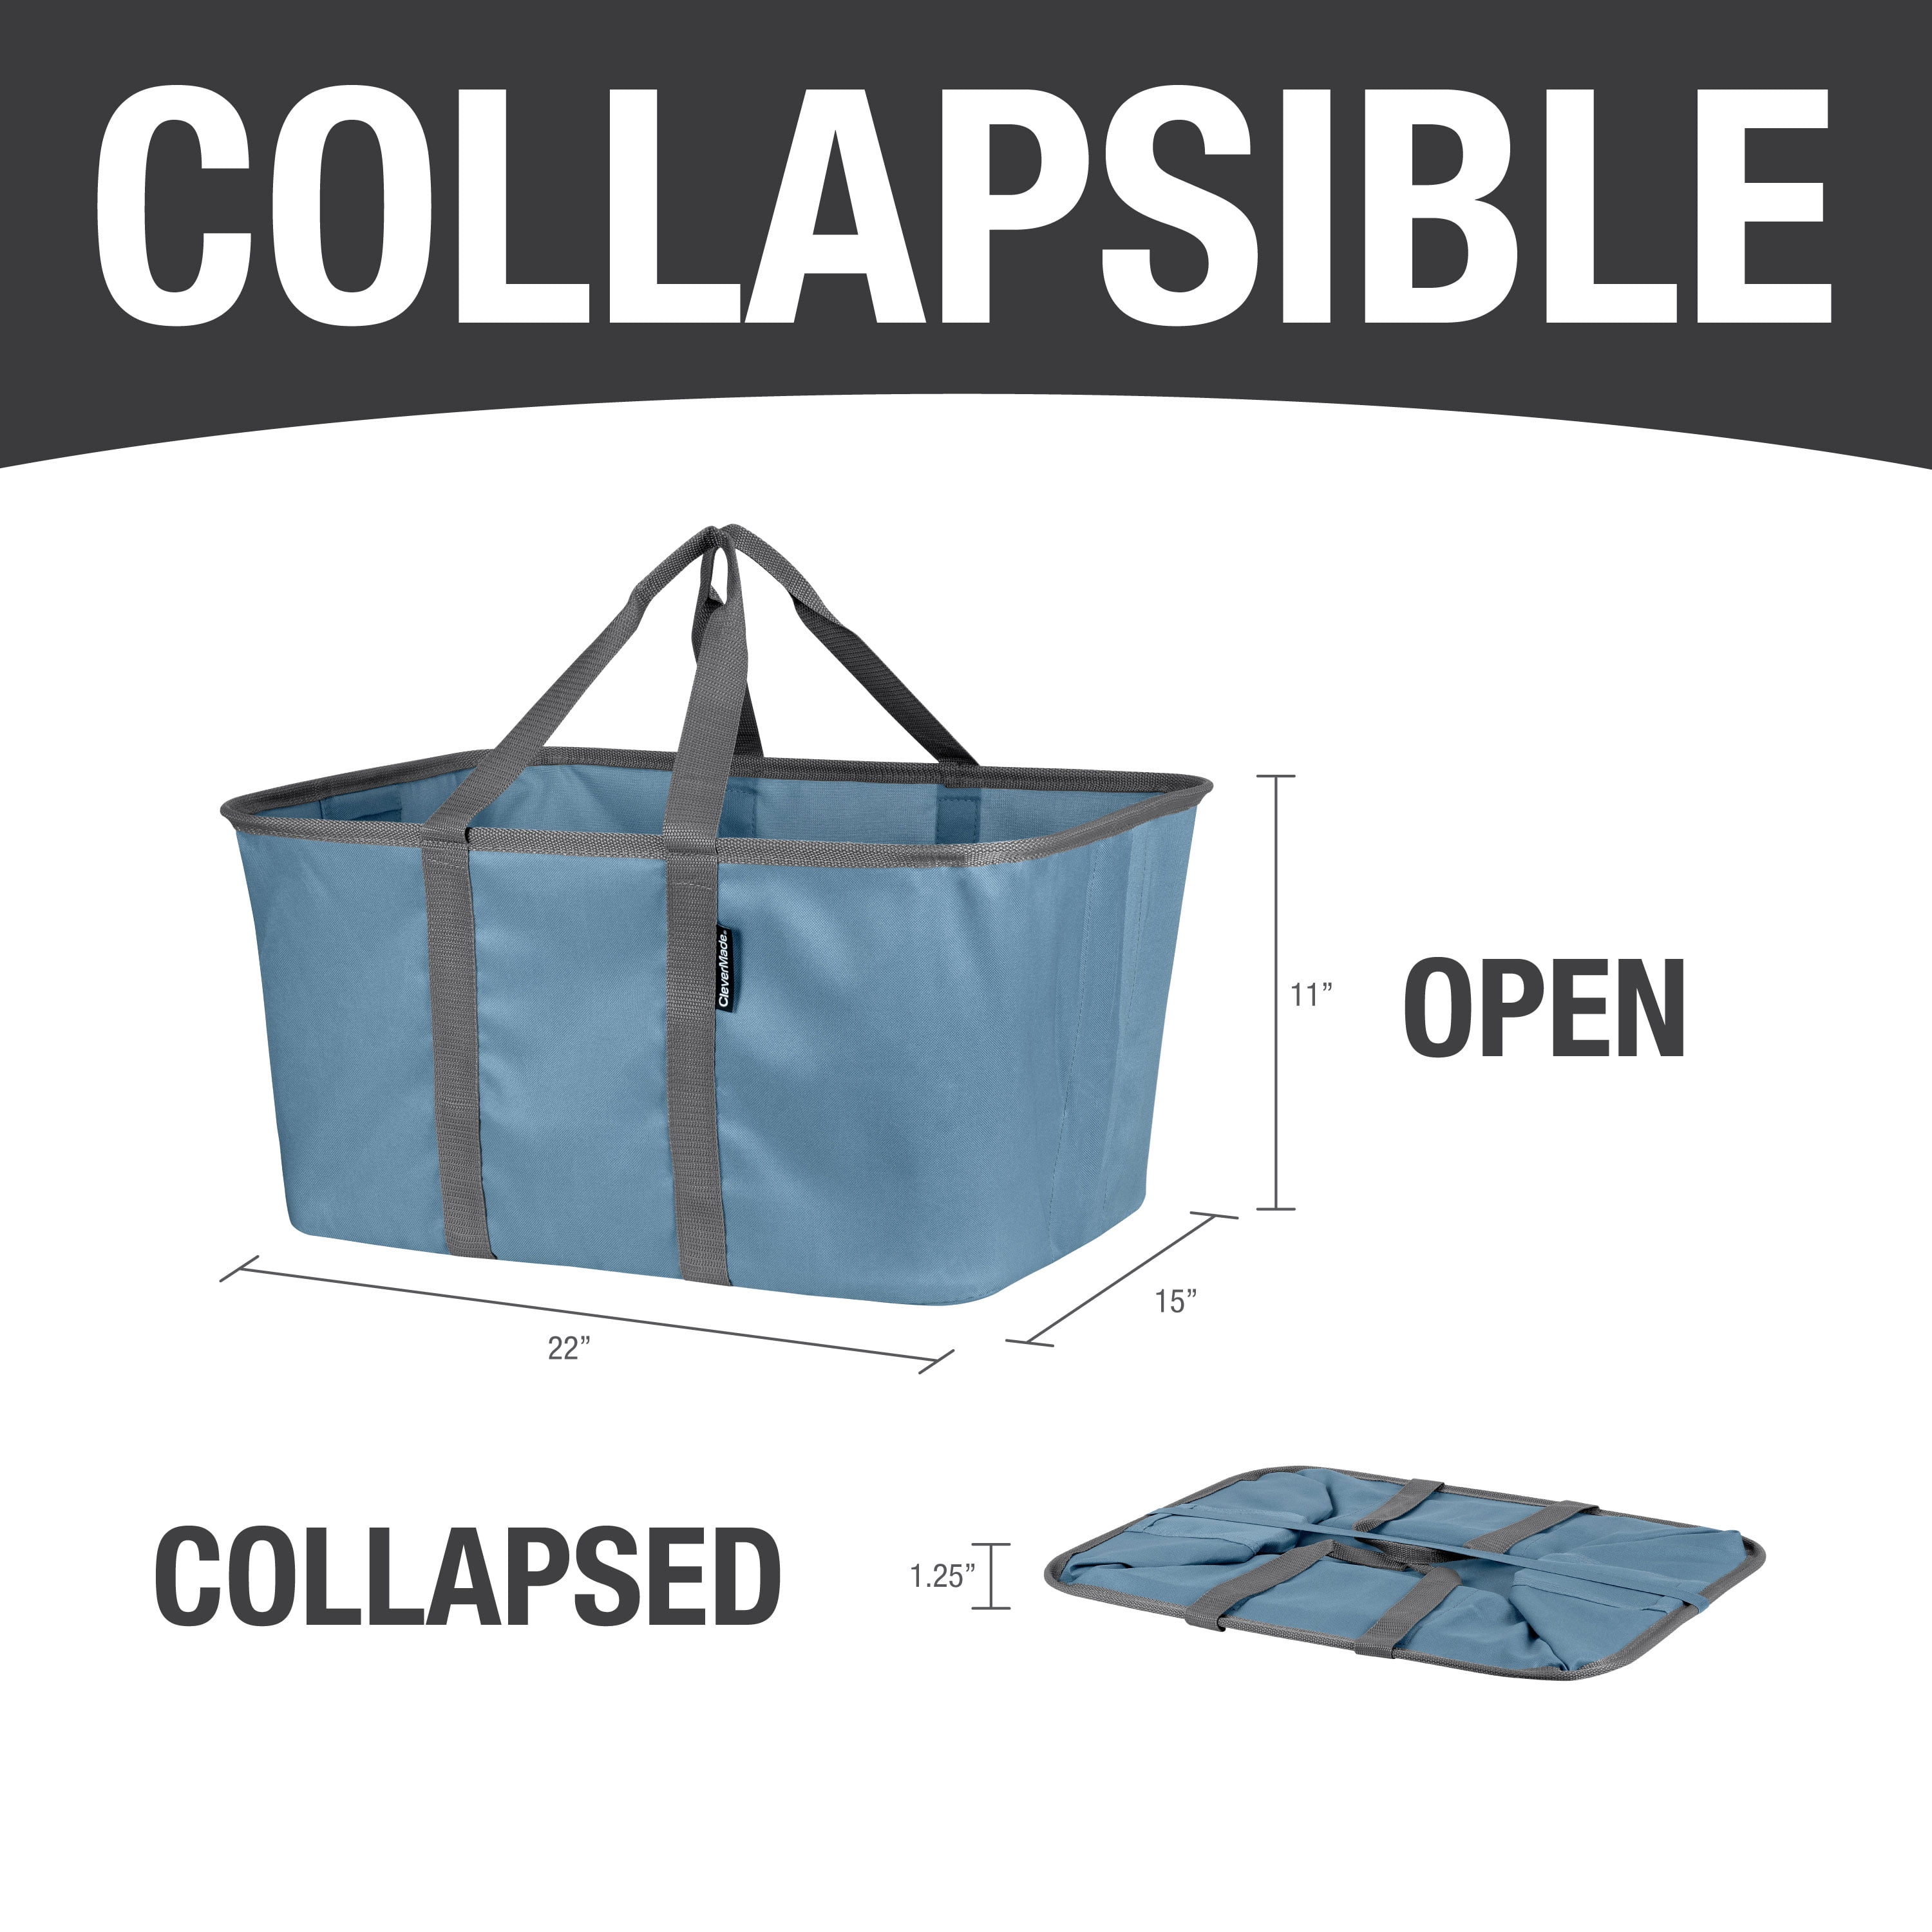 CleverMade Collapsible Fabric Laundry Baskets - Foldable Pop Up Storage  Container Organizer Bags - L…See more CleverMade Collapsible Fabric Laundry